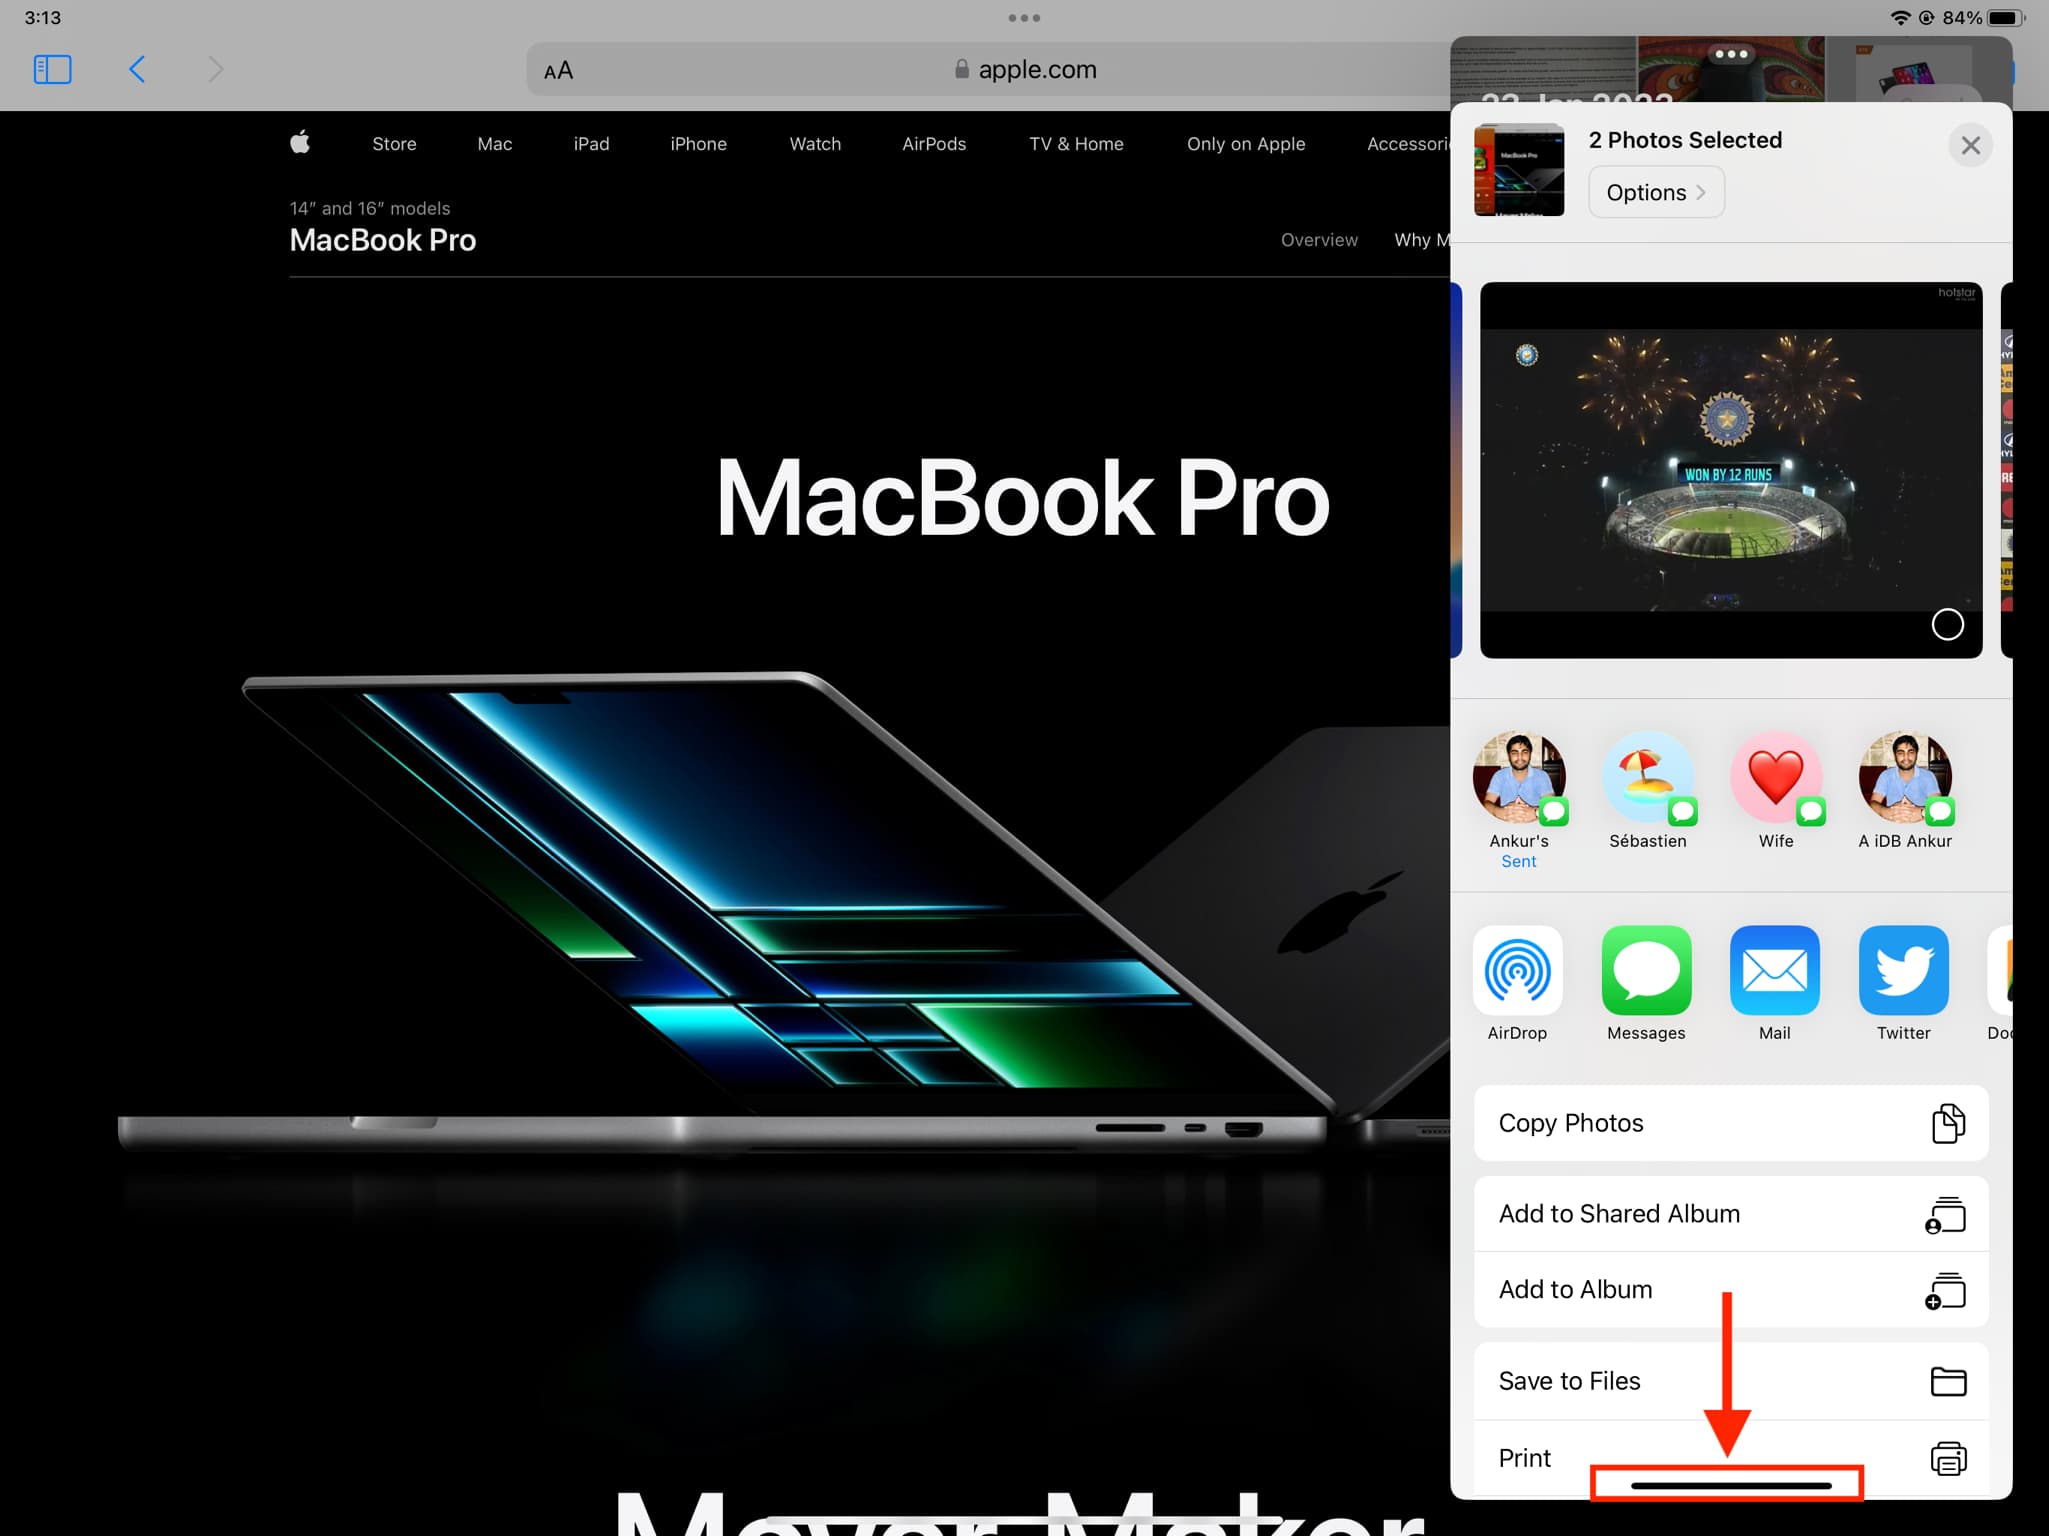 Swipe up and pause on Slide Over Home indicator to see all open floating windows on iPad